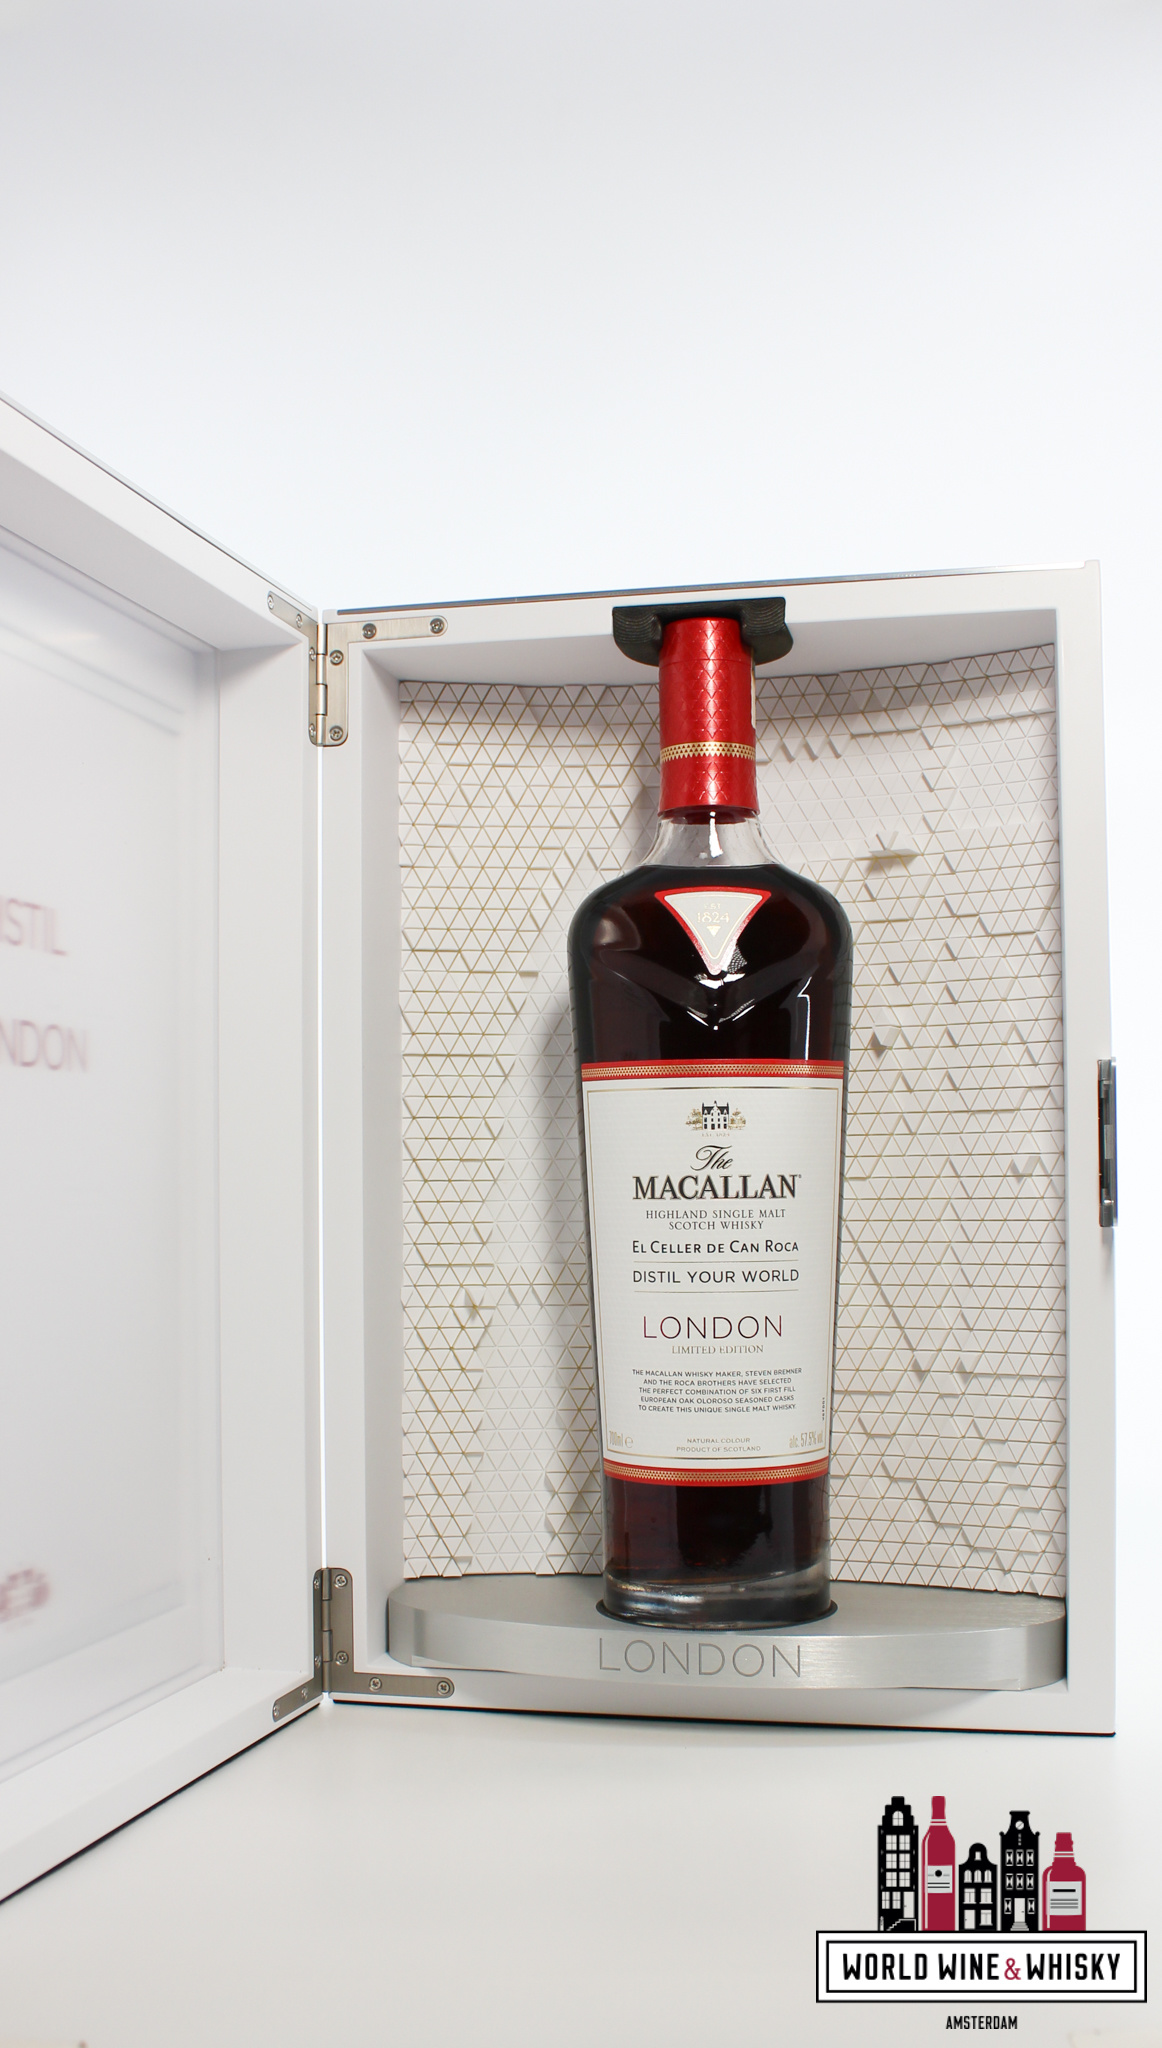 Macallan Macallan 2020 - Distil Your World - London Release - Limited Edition 57.5% (1 of 2000)